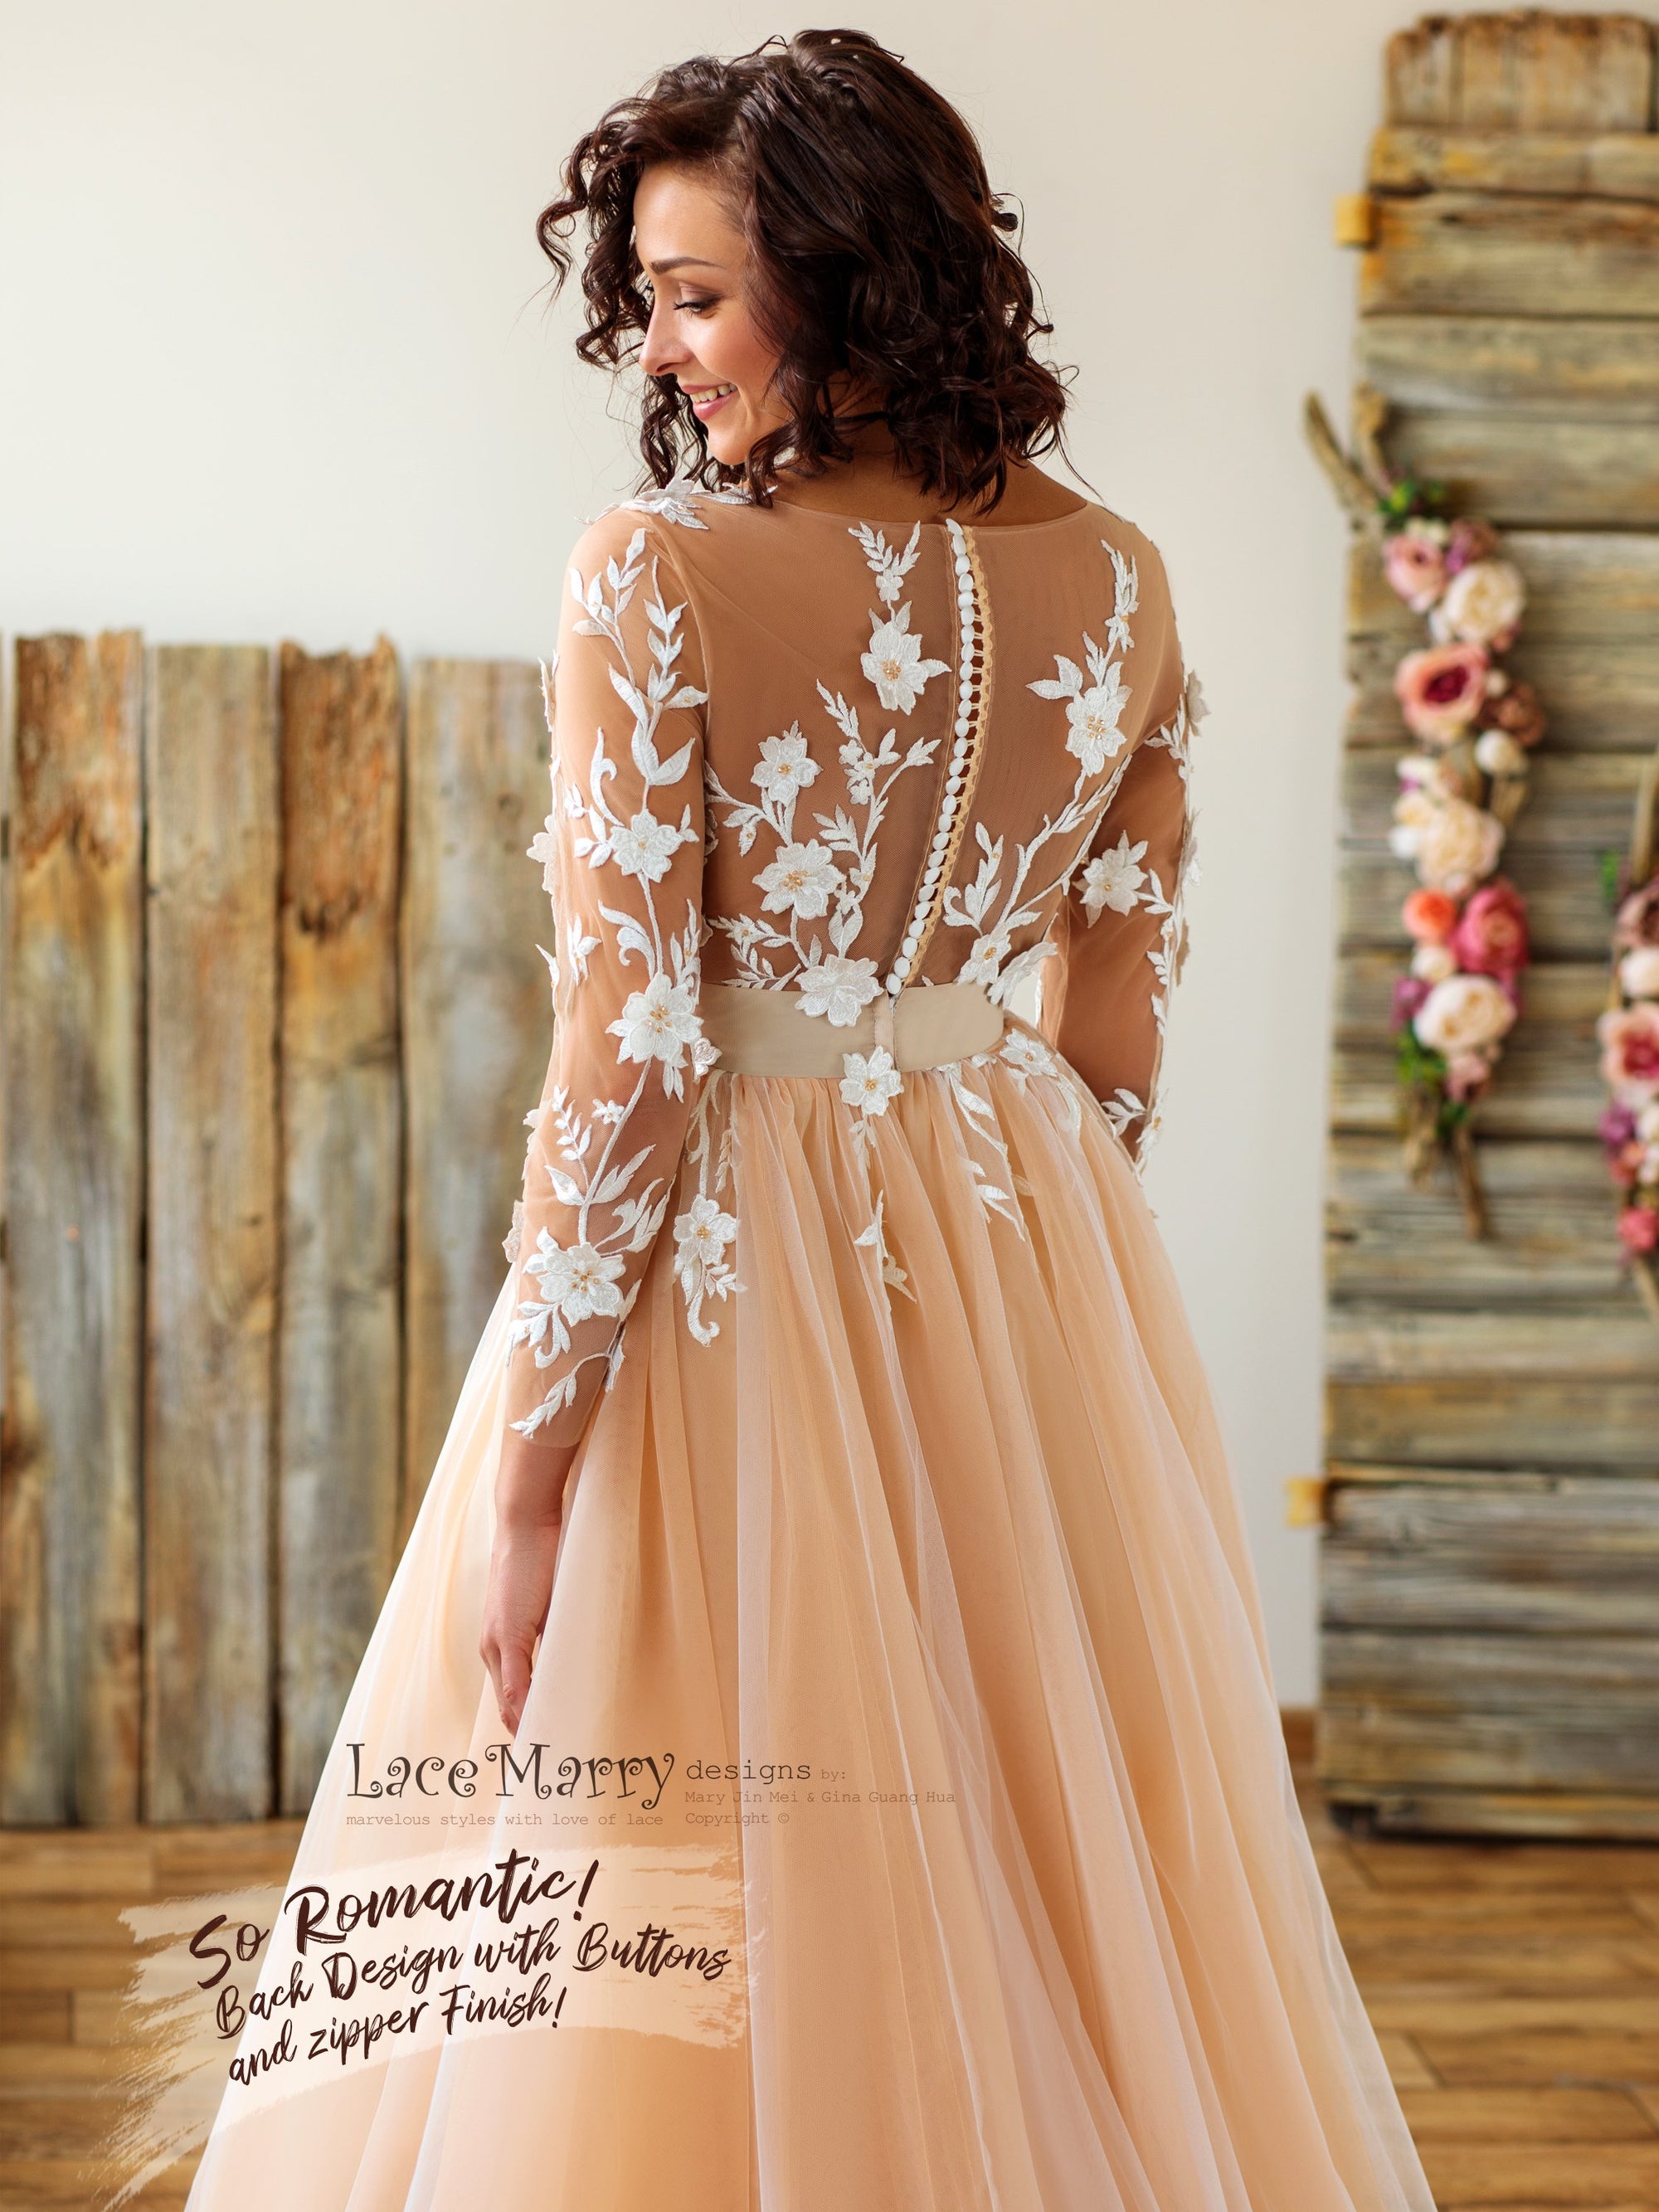 Sexy Boho Wedding Dress with Long Lace Sleeves